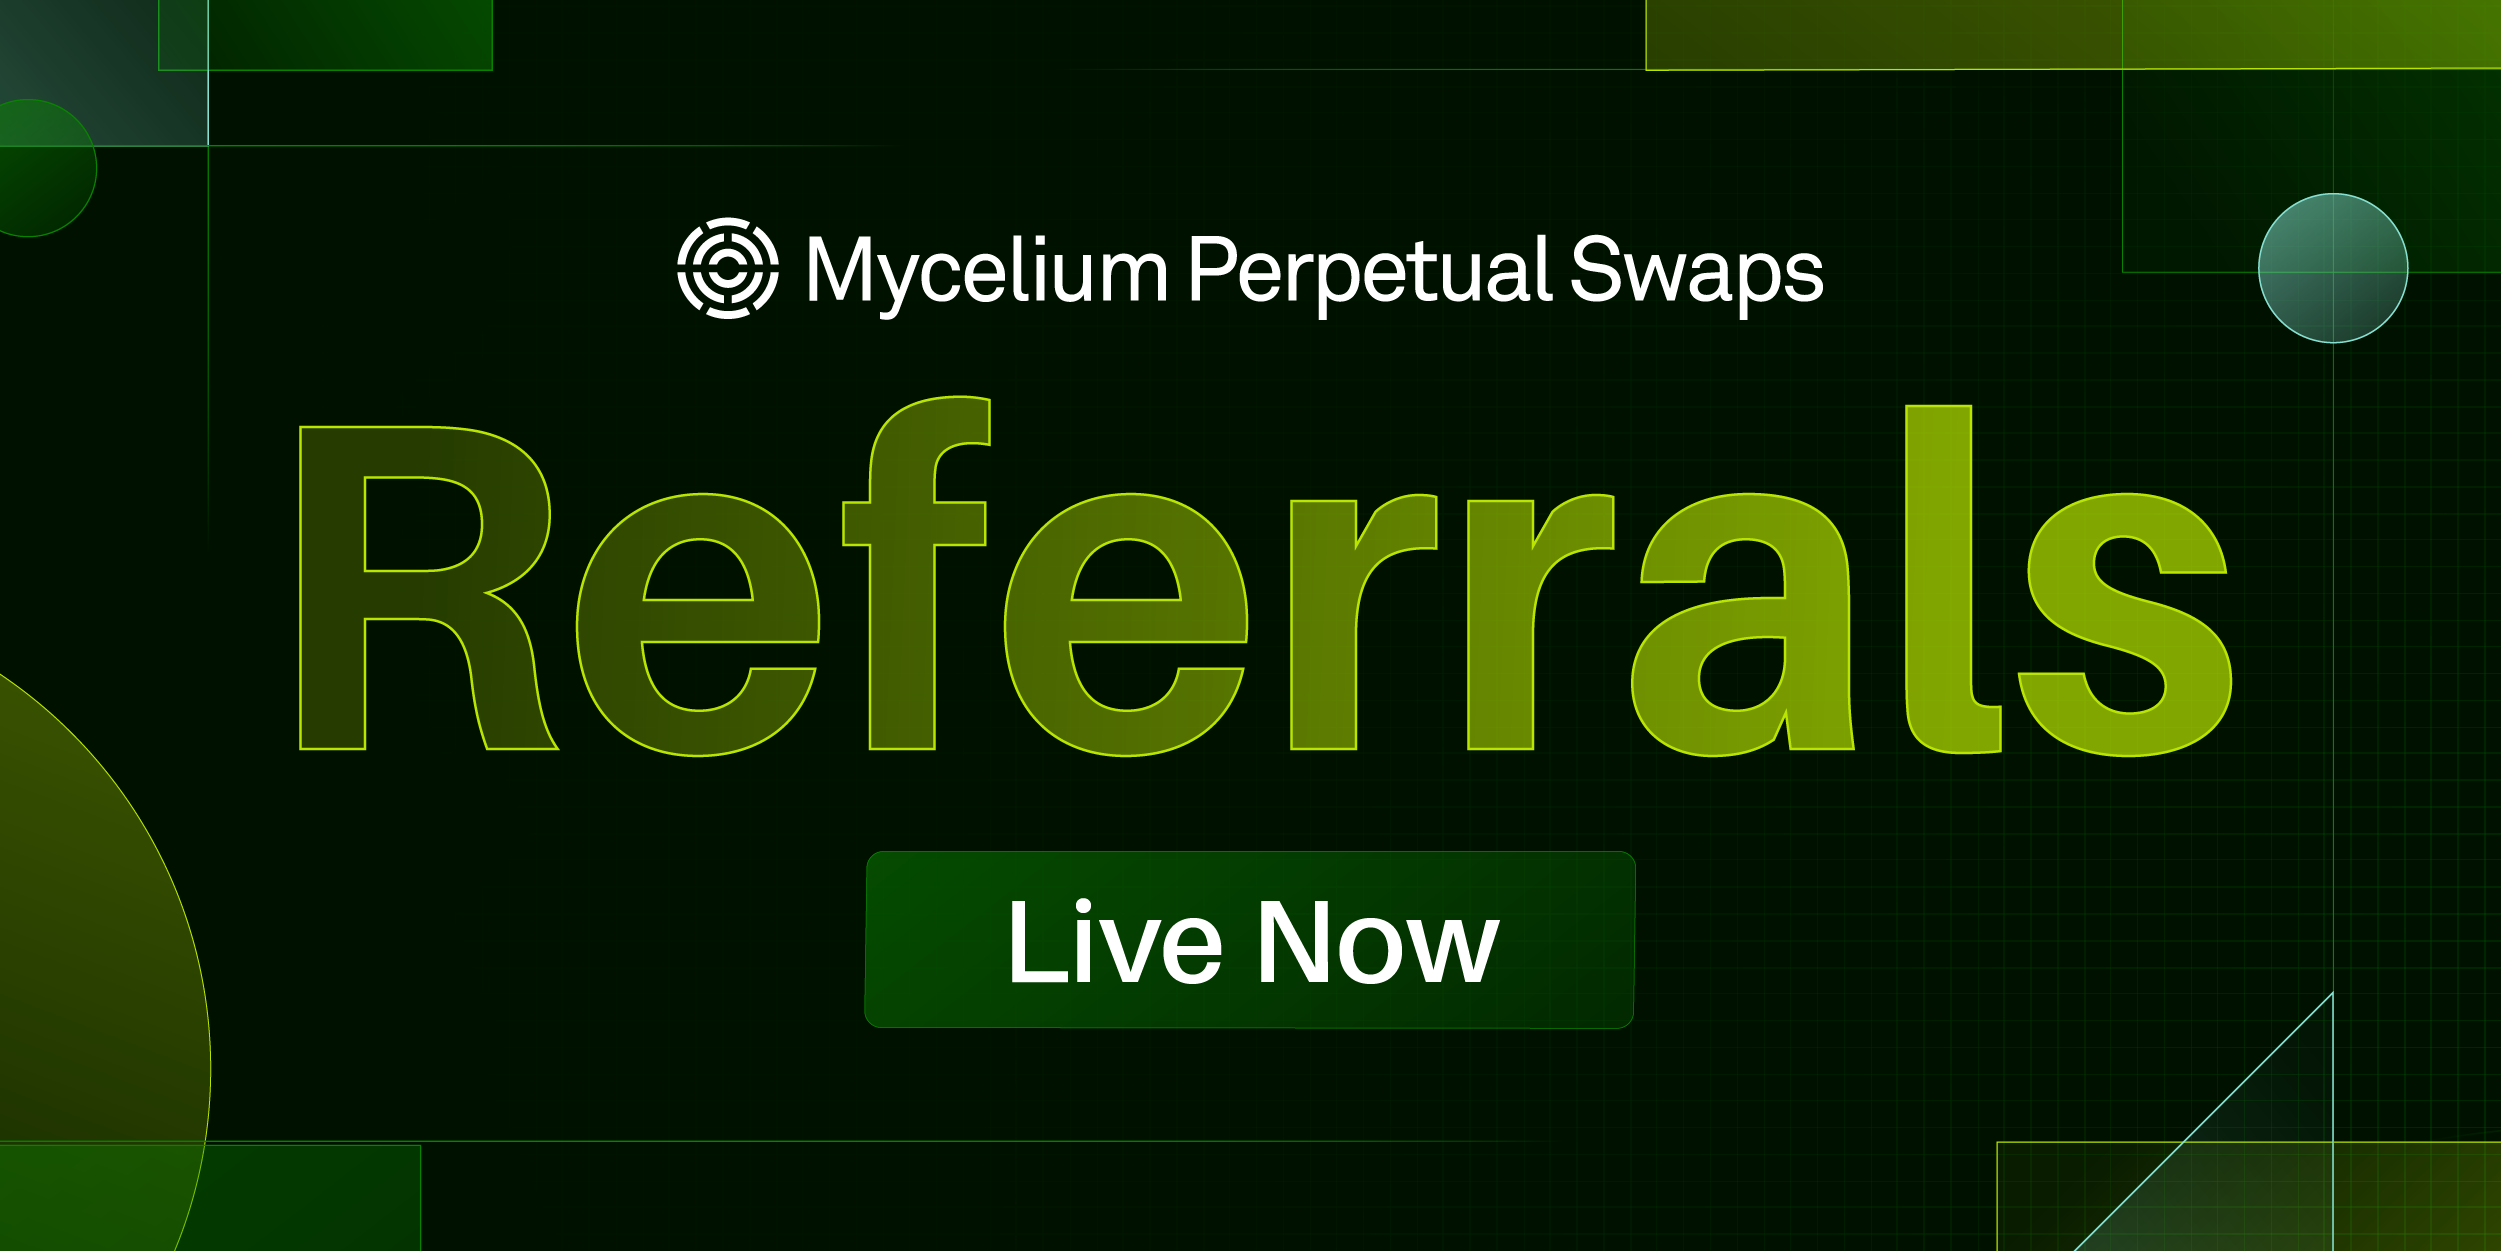 Referrals are LIVE now